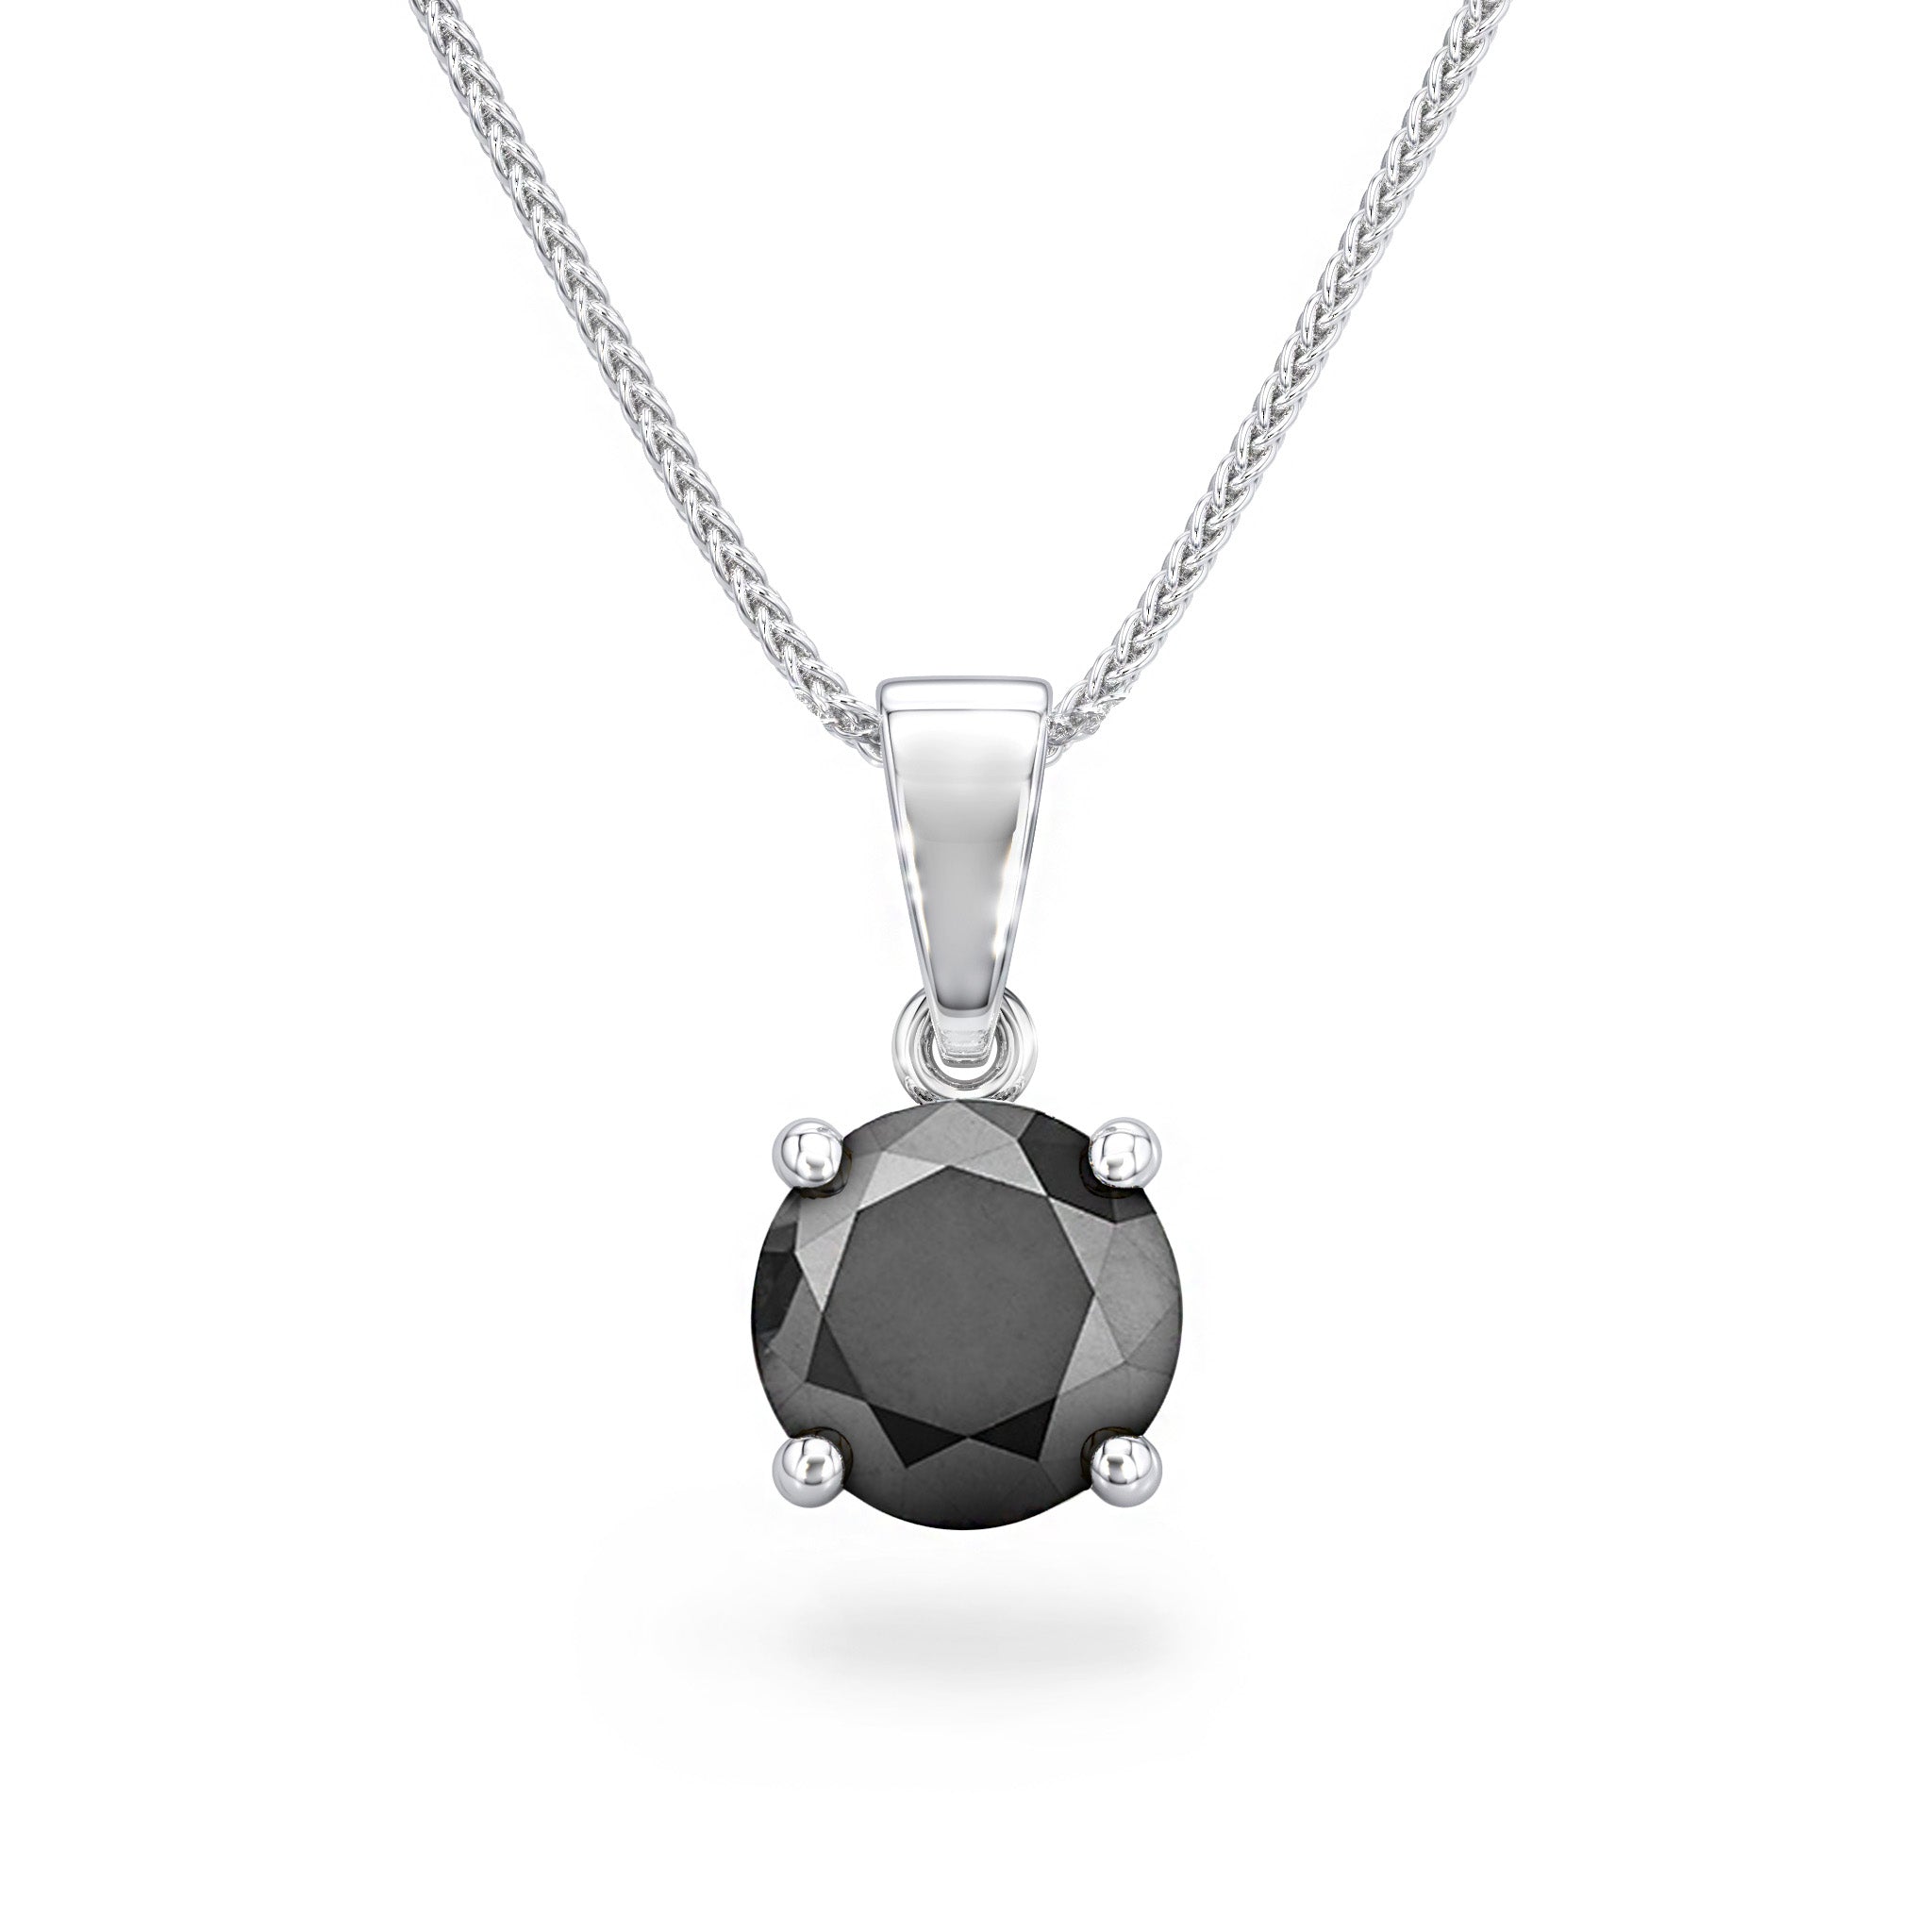 Shimansky - Black Diamond Solitaire Pendant 1.20ct crafted in 18K White Gold